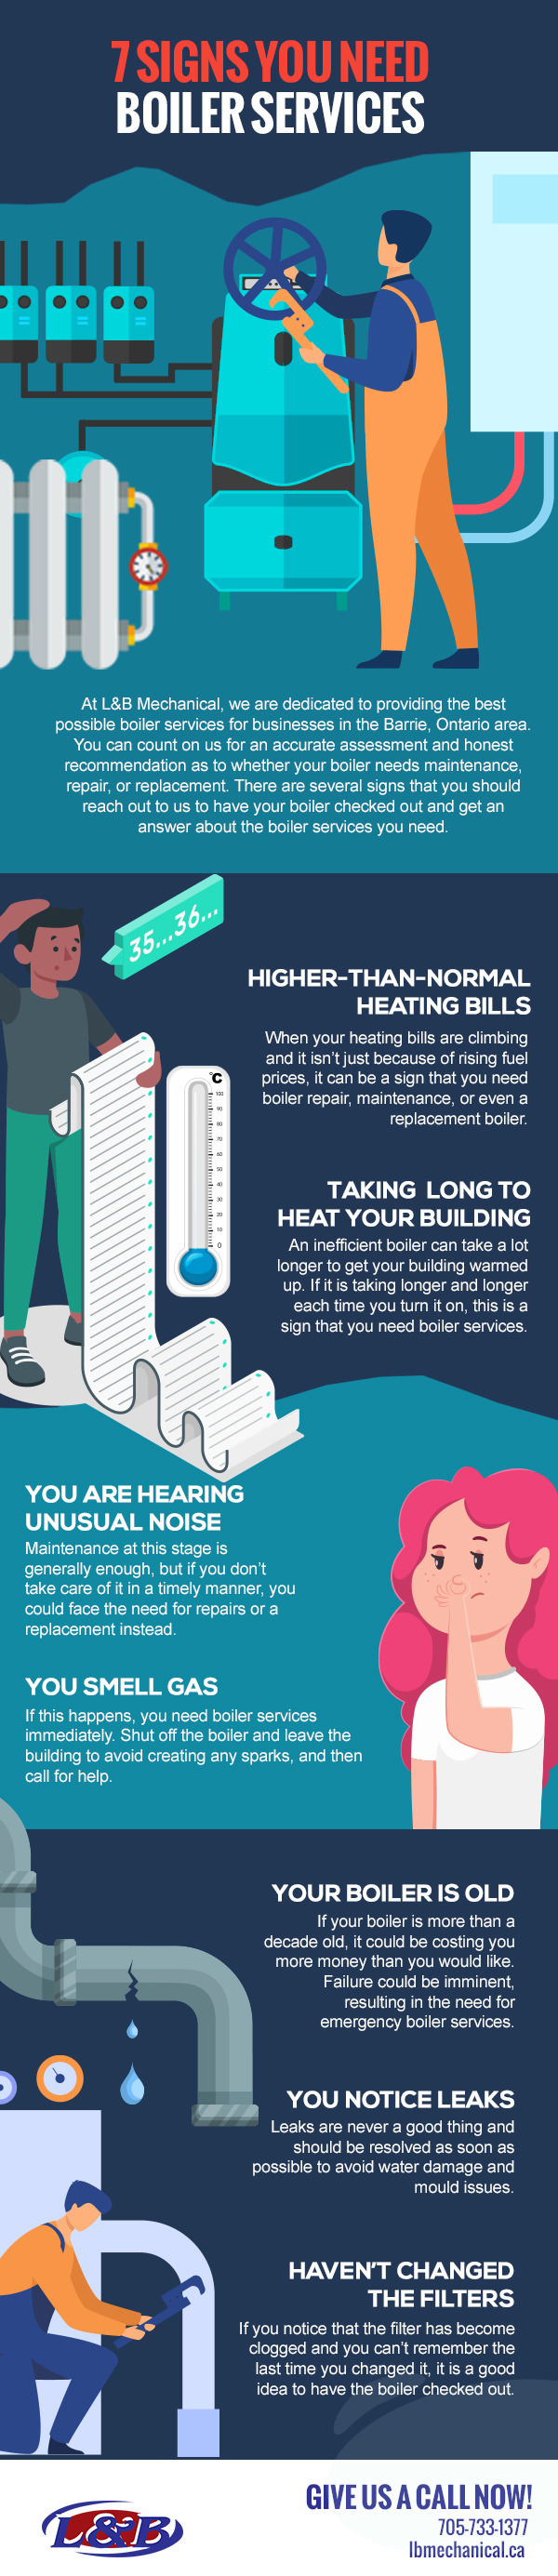 7 Signs You Need Boiler Services [infographic]